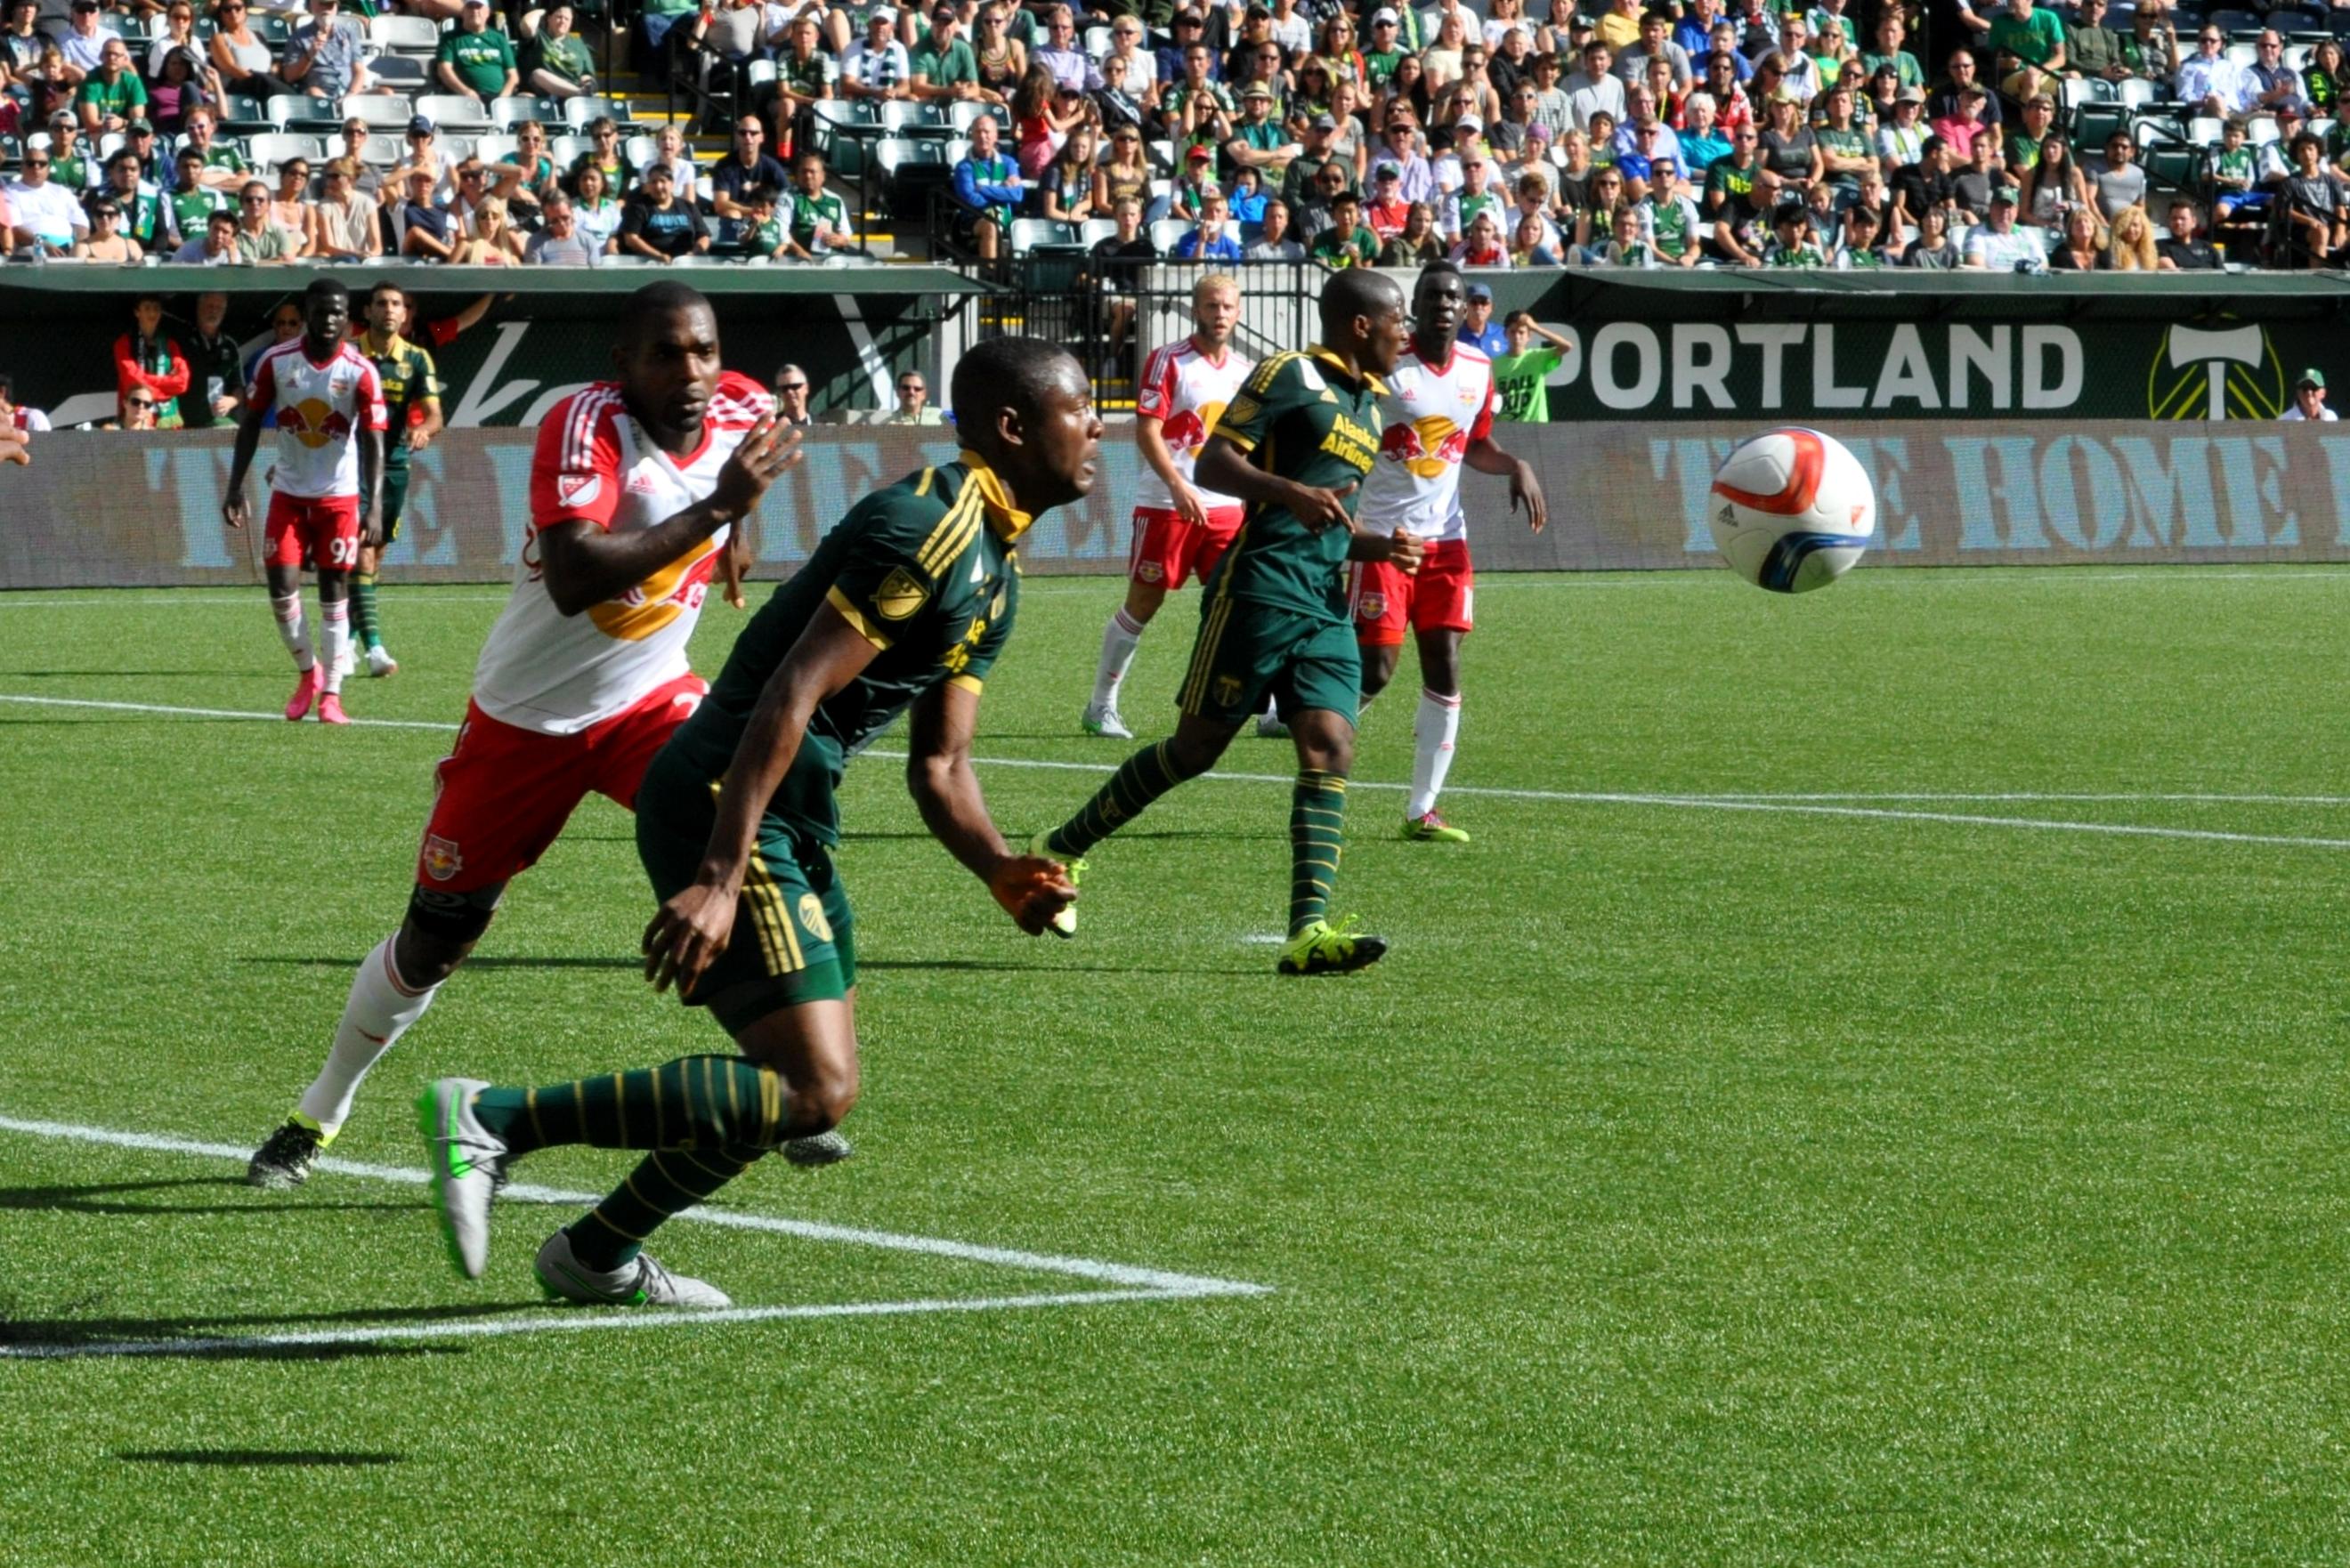 Two late first half goals by New York Red Bulls sink Timbers 2-0